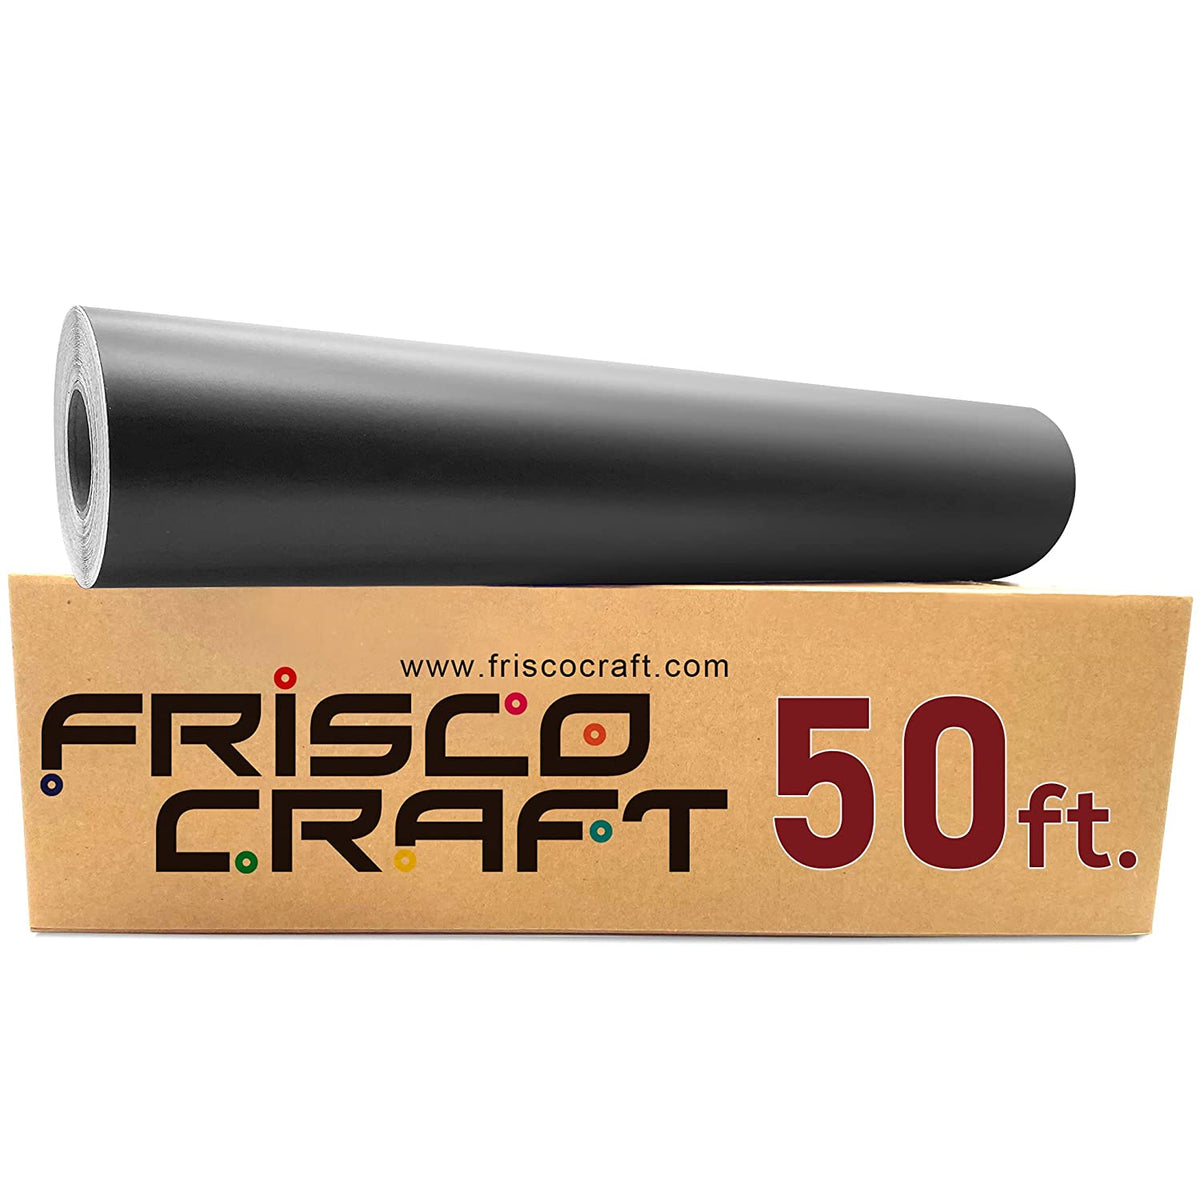 24 x 50 ft Roll of glossy Black Repositionable Adhesive-Backed Vinyl for  Craft Cutters, Punches and Vinyl Sign Cutters